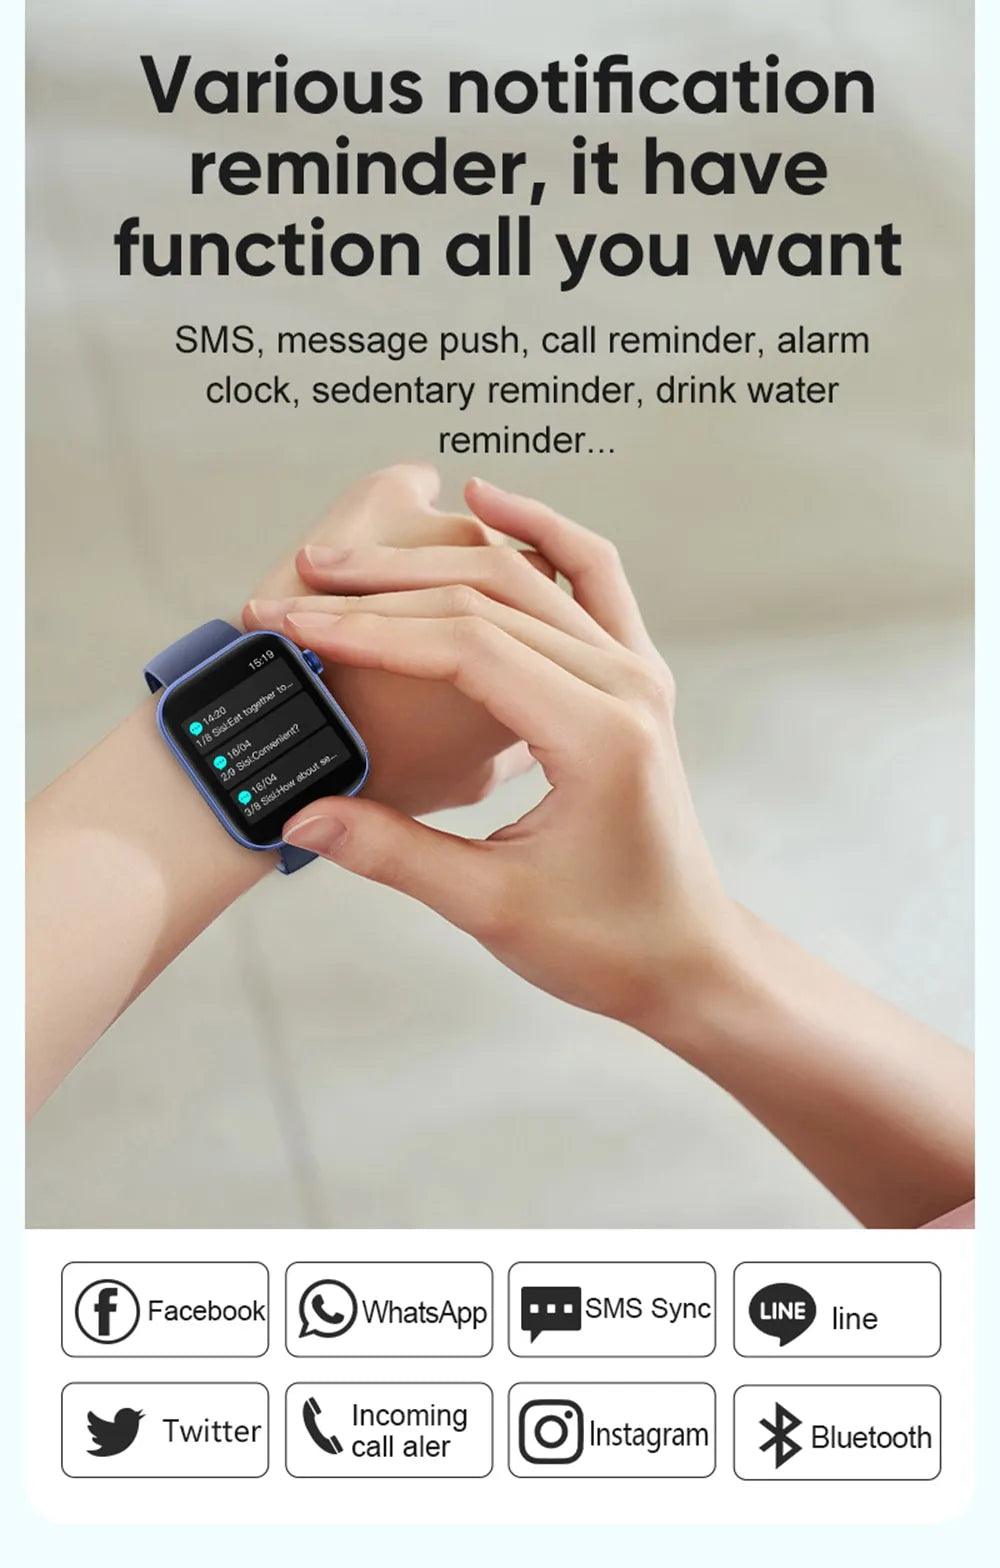 Couples Smart Watch